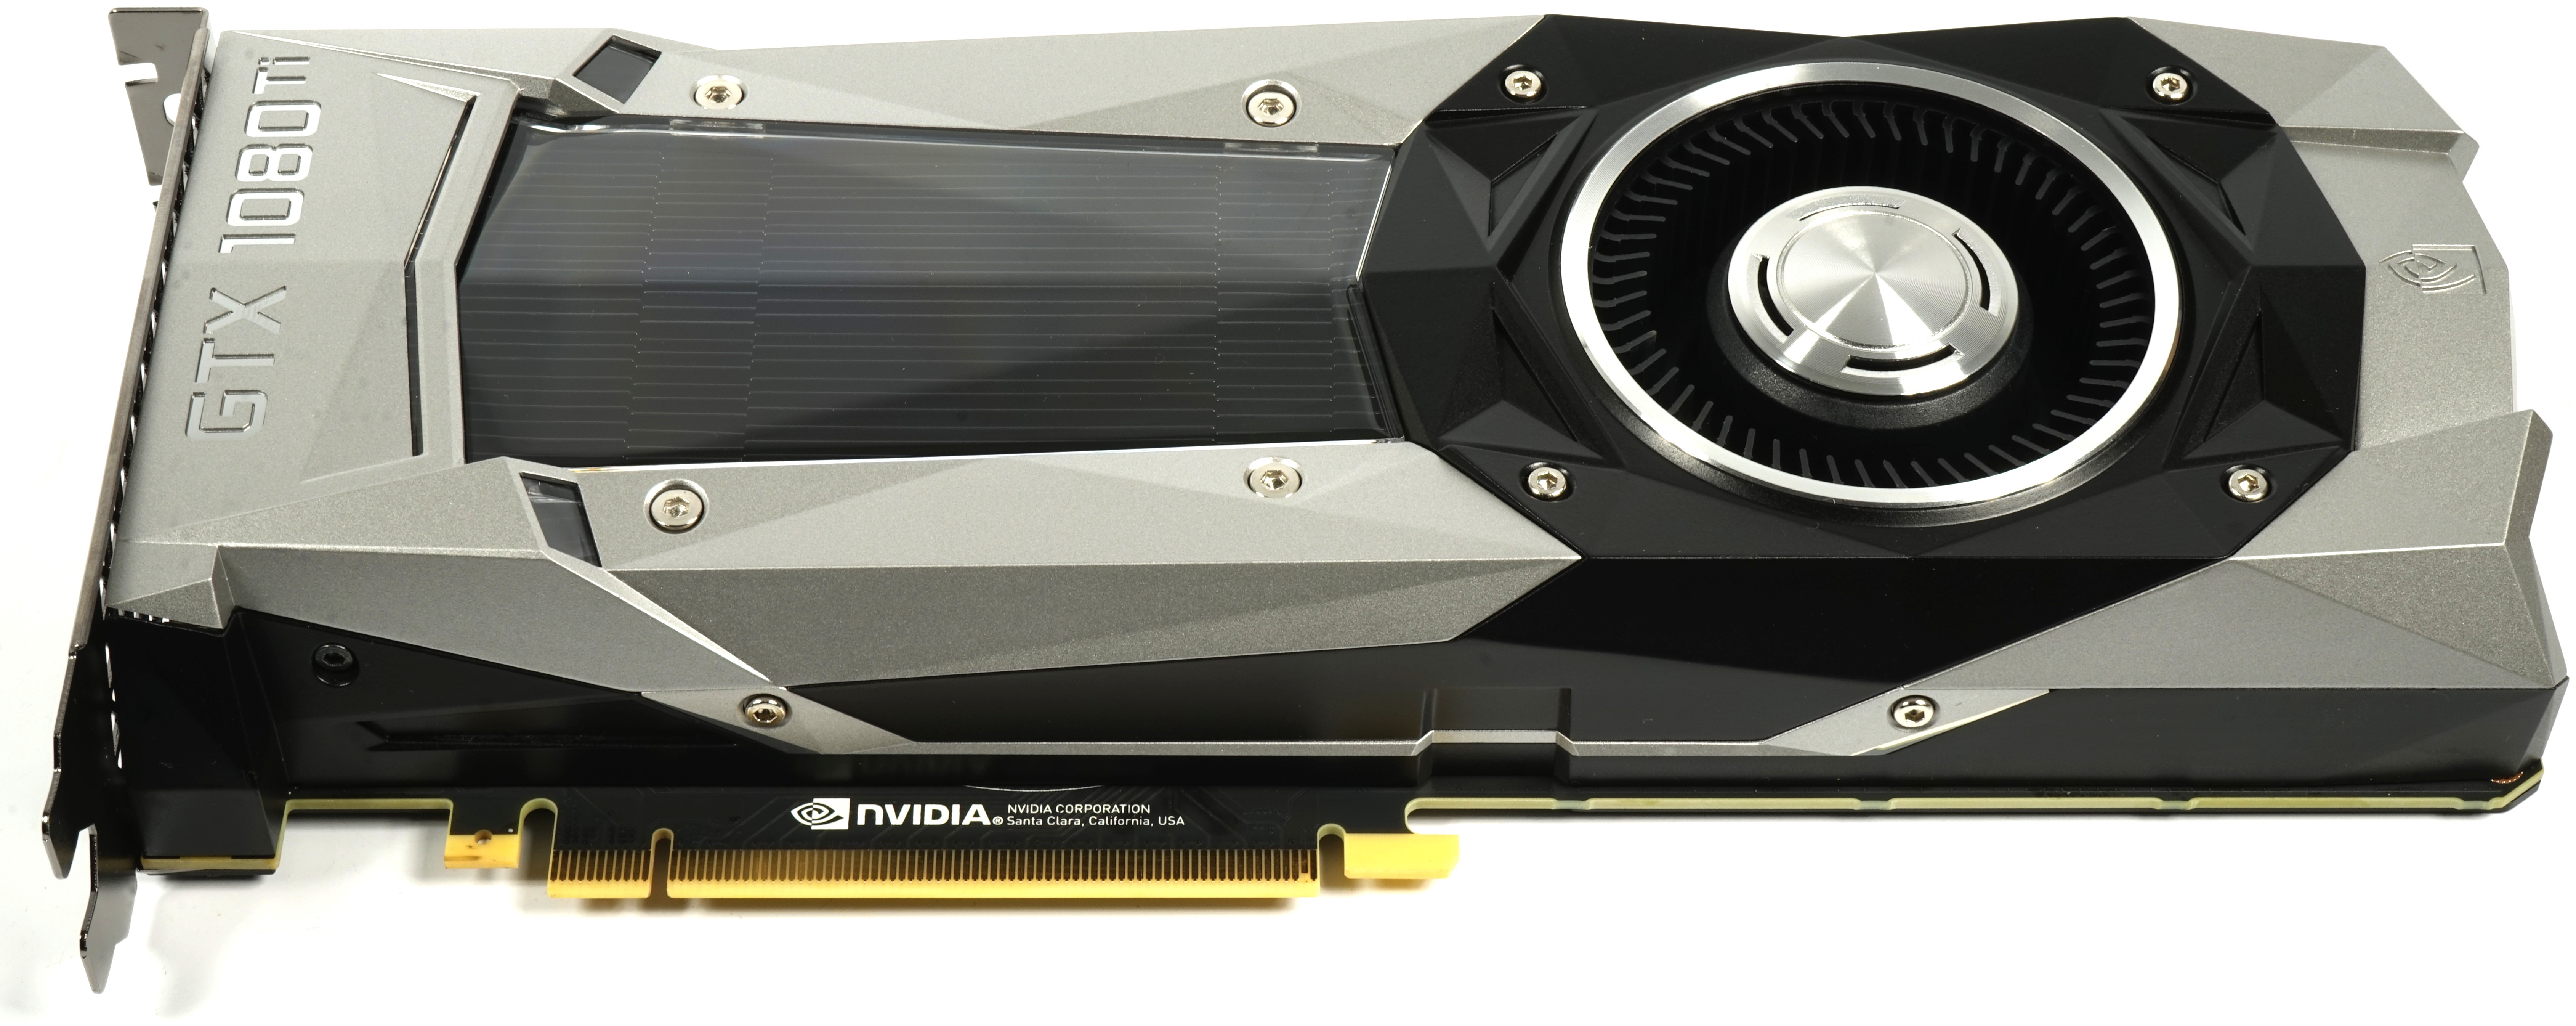 Overview and comparison: All Nvidia GeForce GTX 1080 Ti tested so